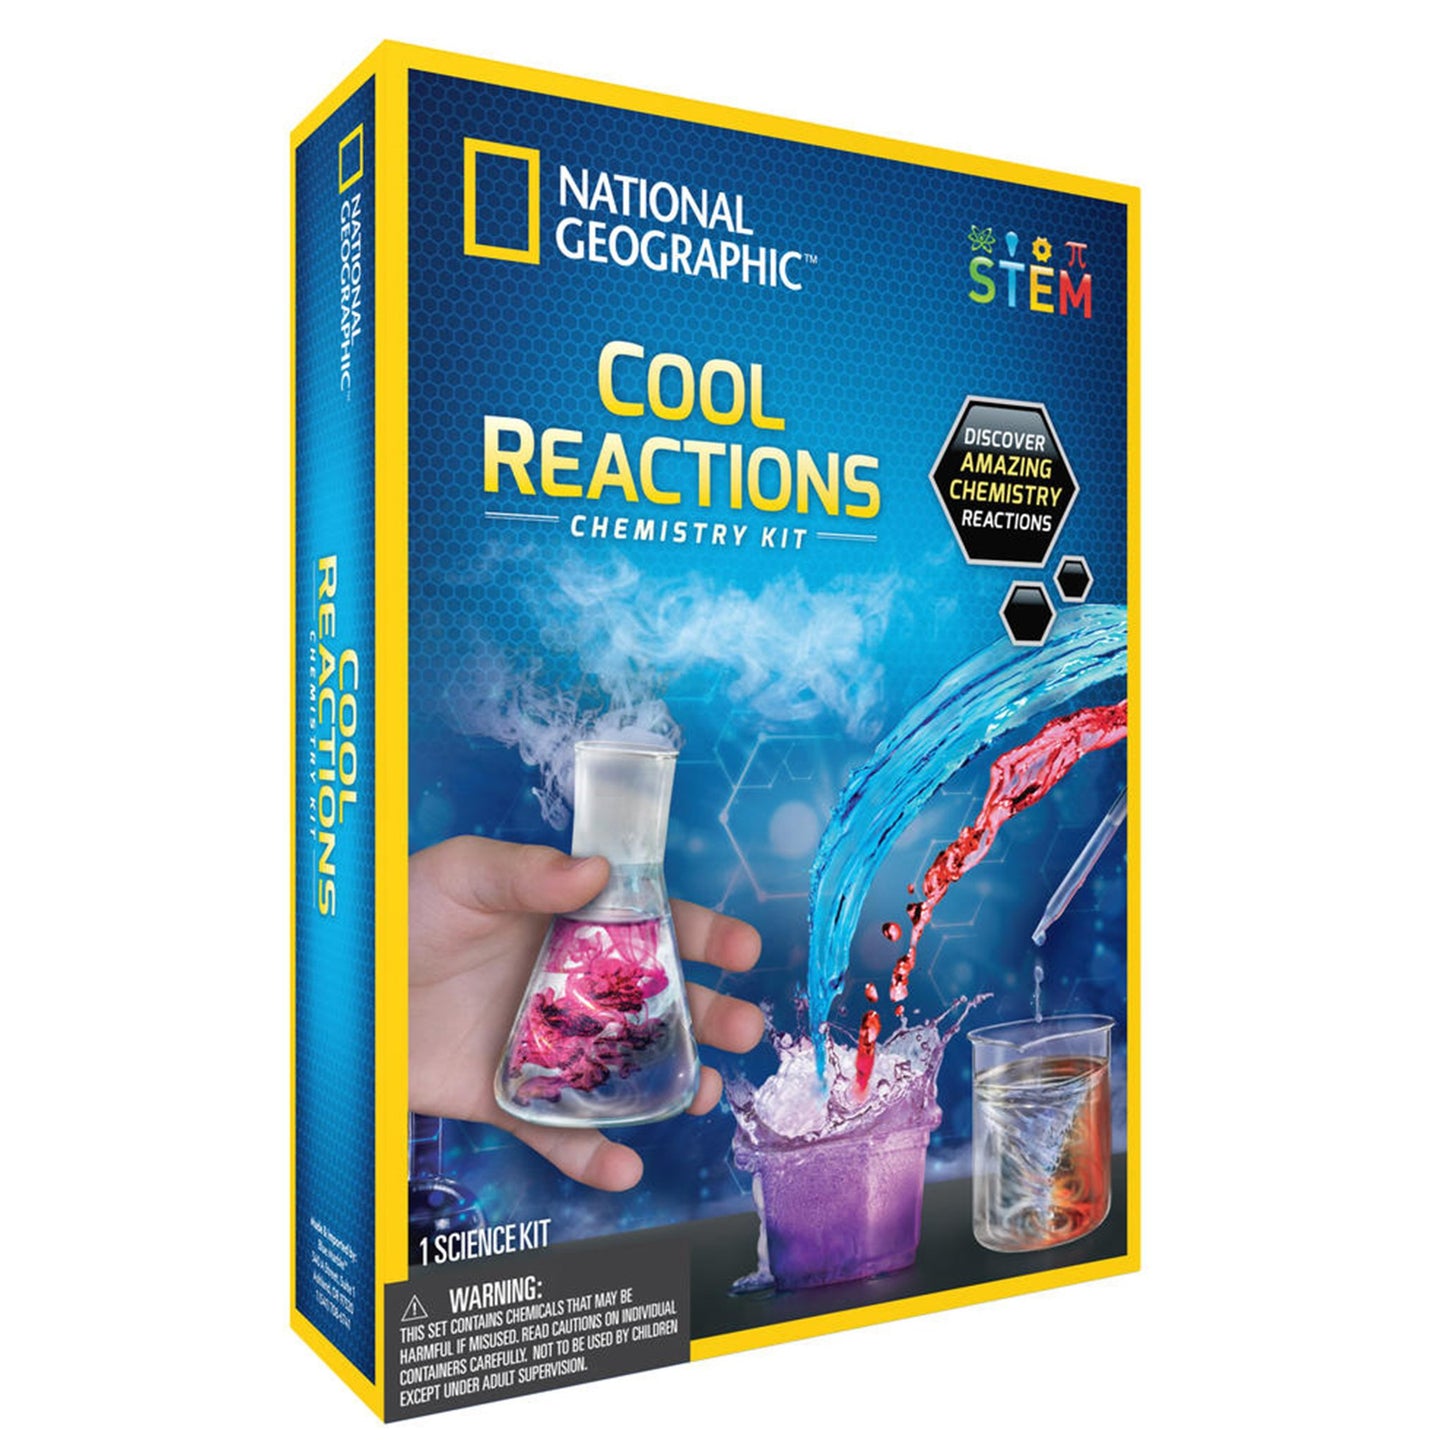 National Geographic Cool Reactions Chemistry